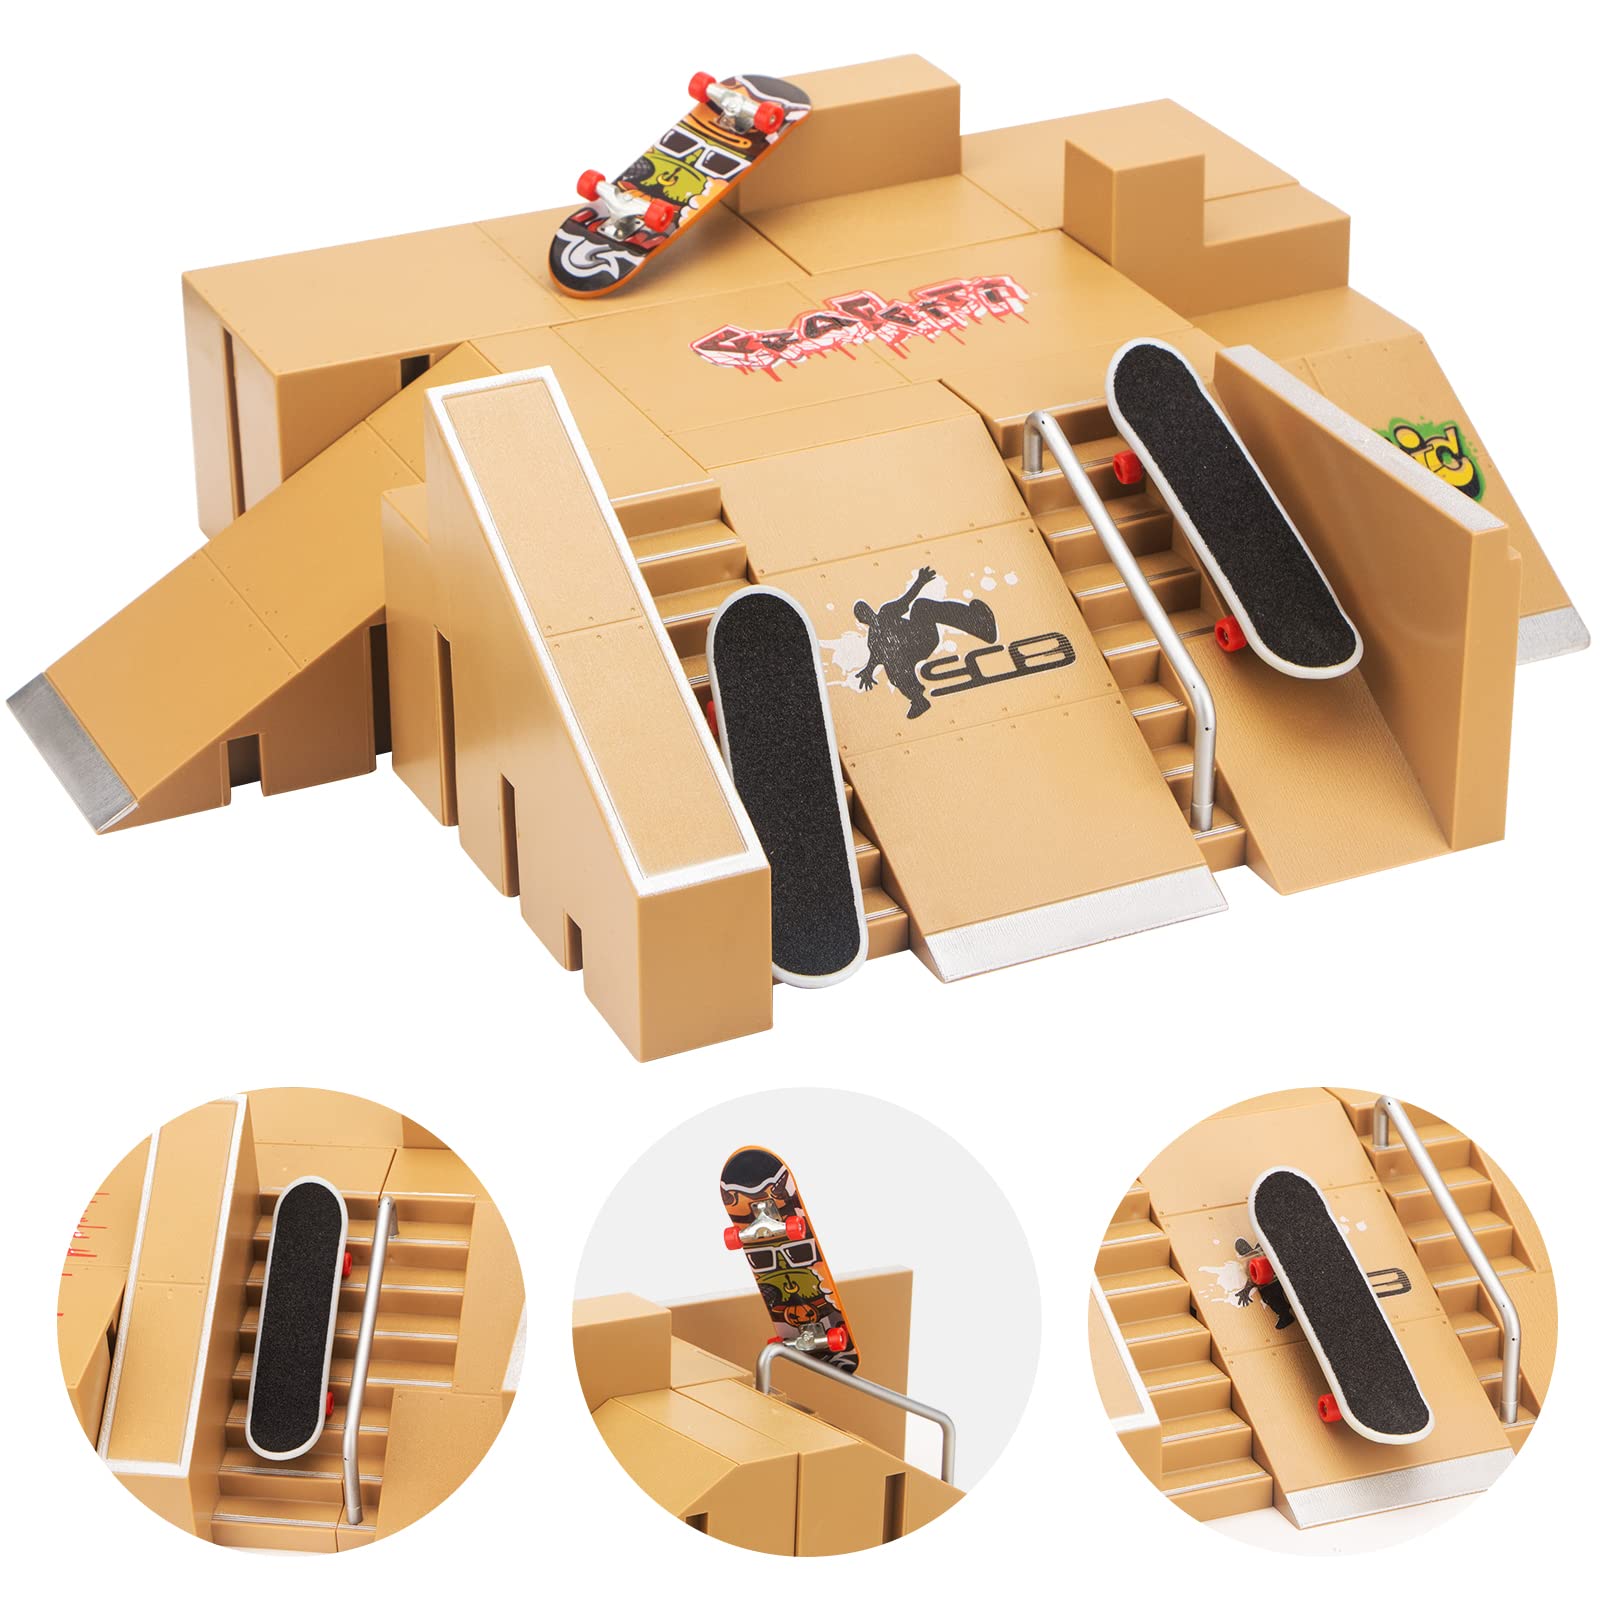 EISHION Fingerboard Skatepark with 3 Finger Skateboards, Customizable and Buildable Fingerboard Ramps with 8pcs Parts, Mini Finger Skate Park Kit for Kids, Toys Gifts for Boys and Girls Ages 6 and up